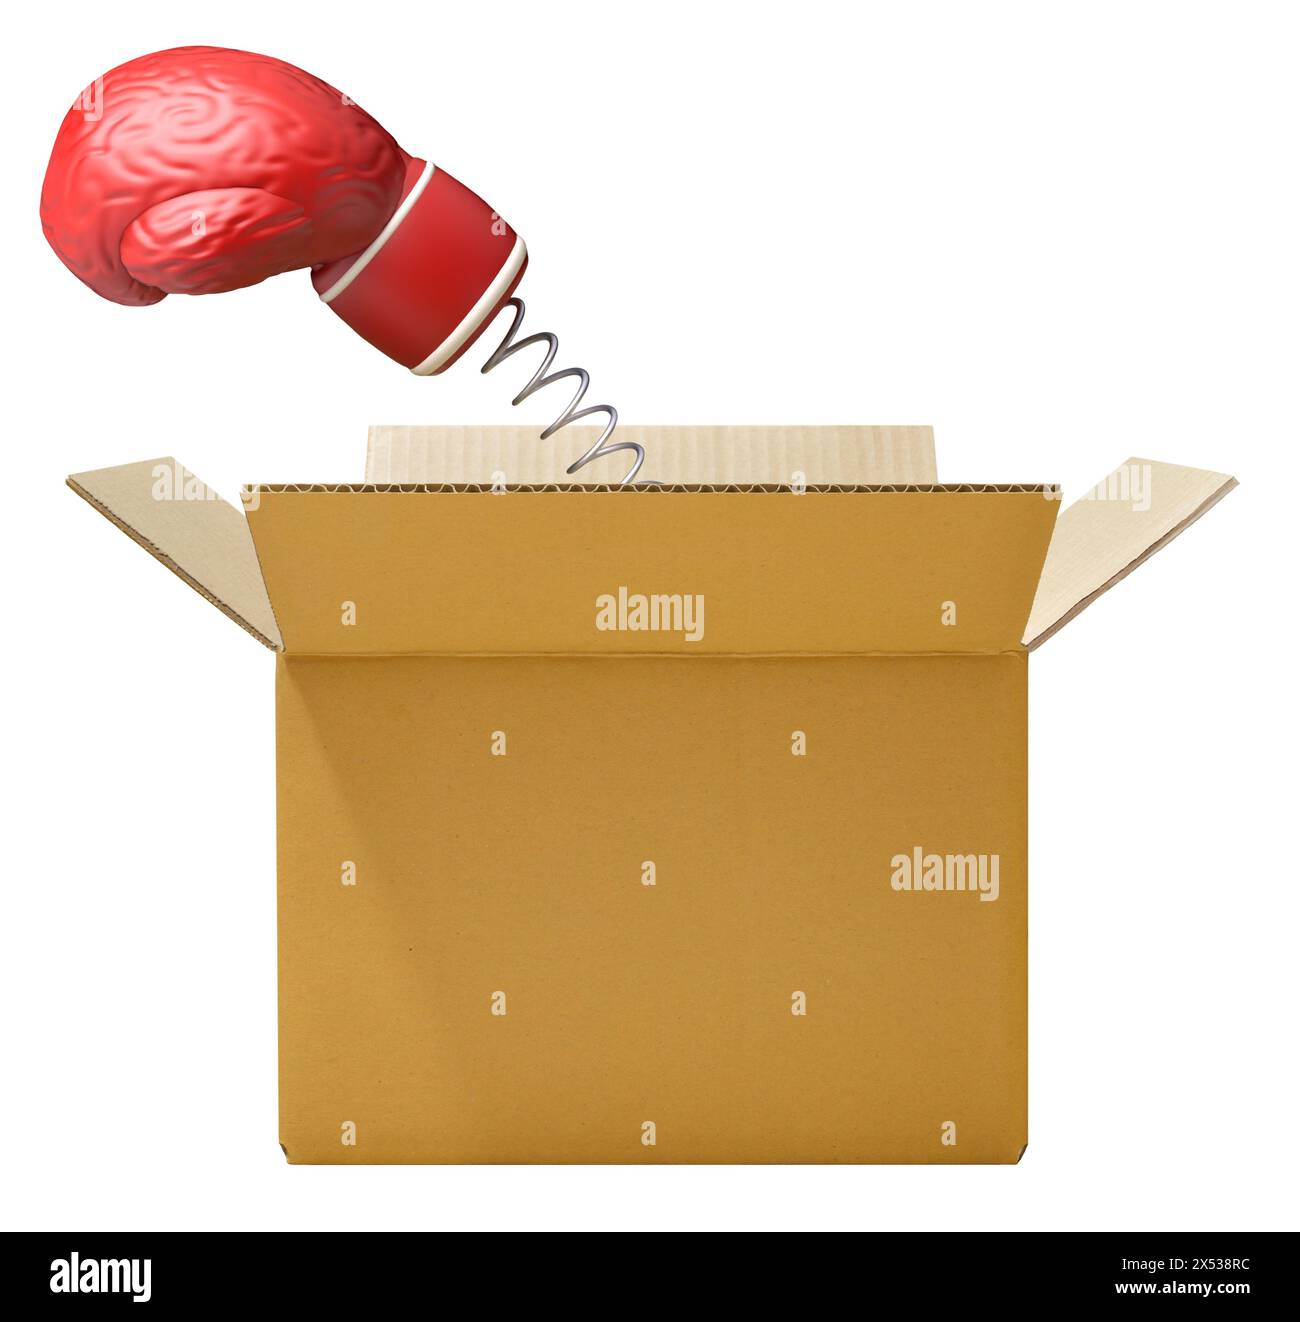 Think outside the box, illustrated by boxing glove with brain-like texture springs out of box on white background Stock Photo